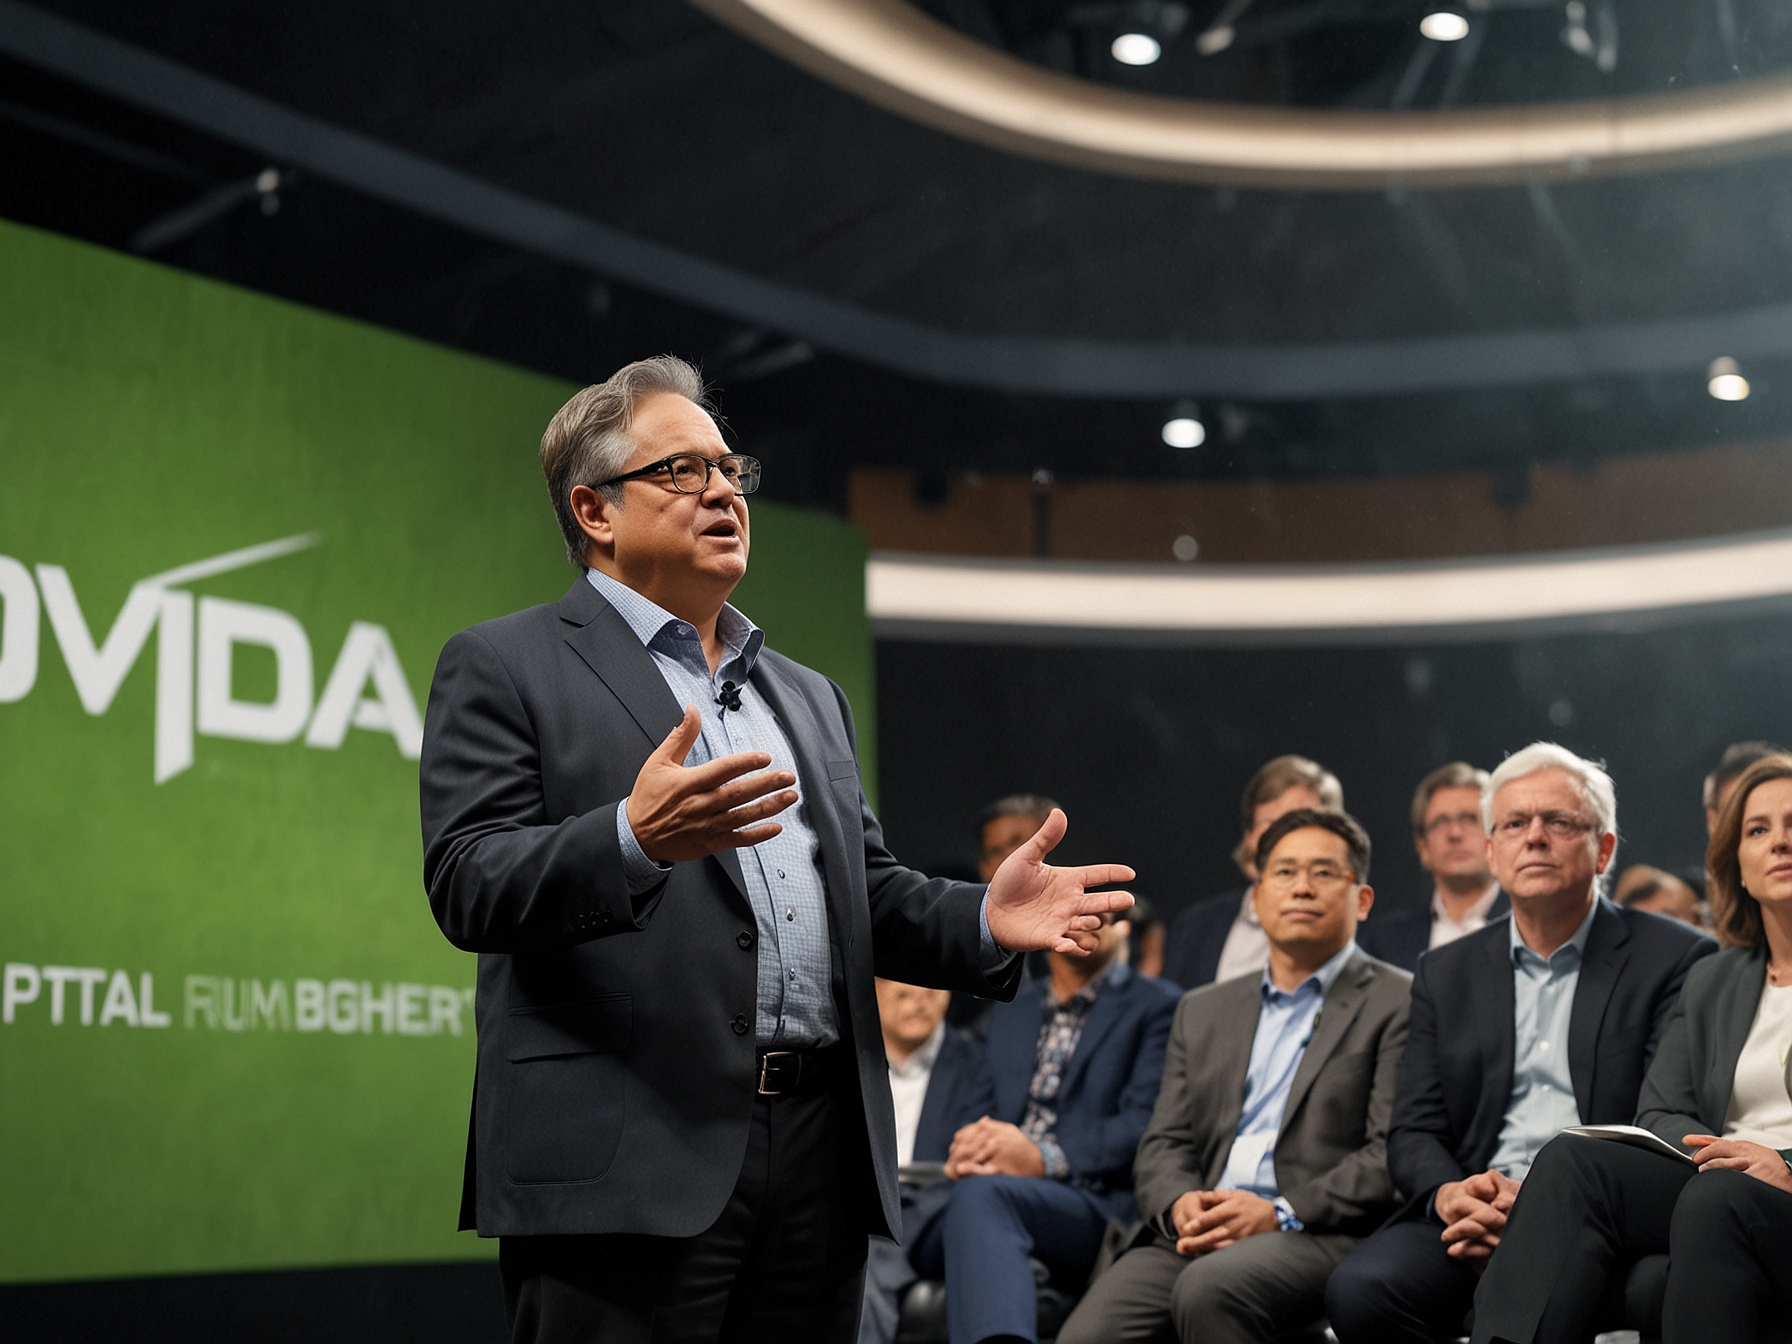 An executive addressing Nvidia's future plans at a tech conference, emphasizing the company's focus on innovation in AI, machine learning, and automotive technologies despite recent market challenges.